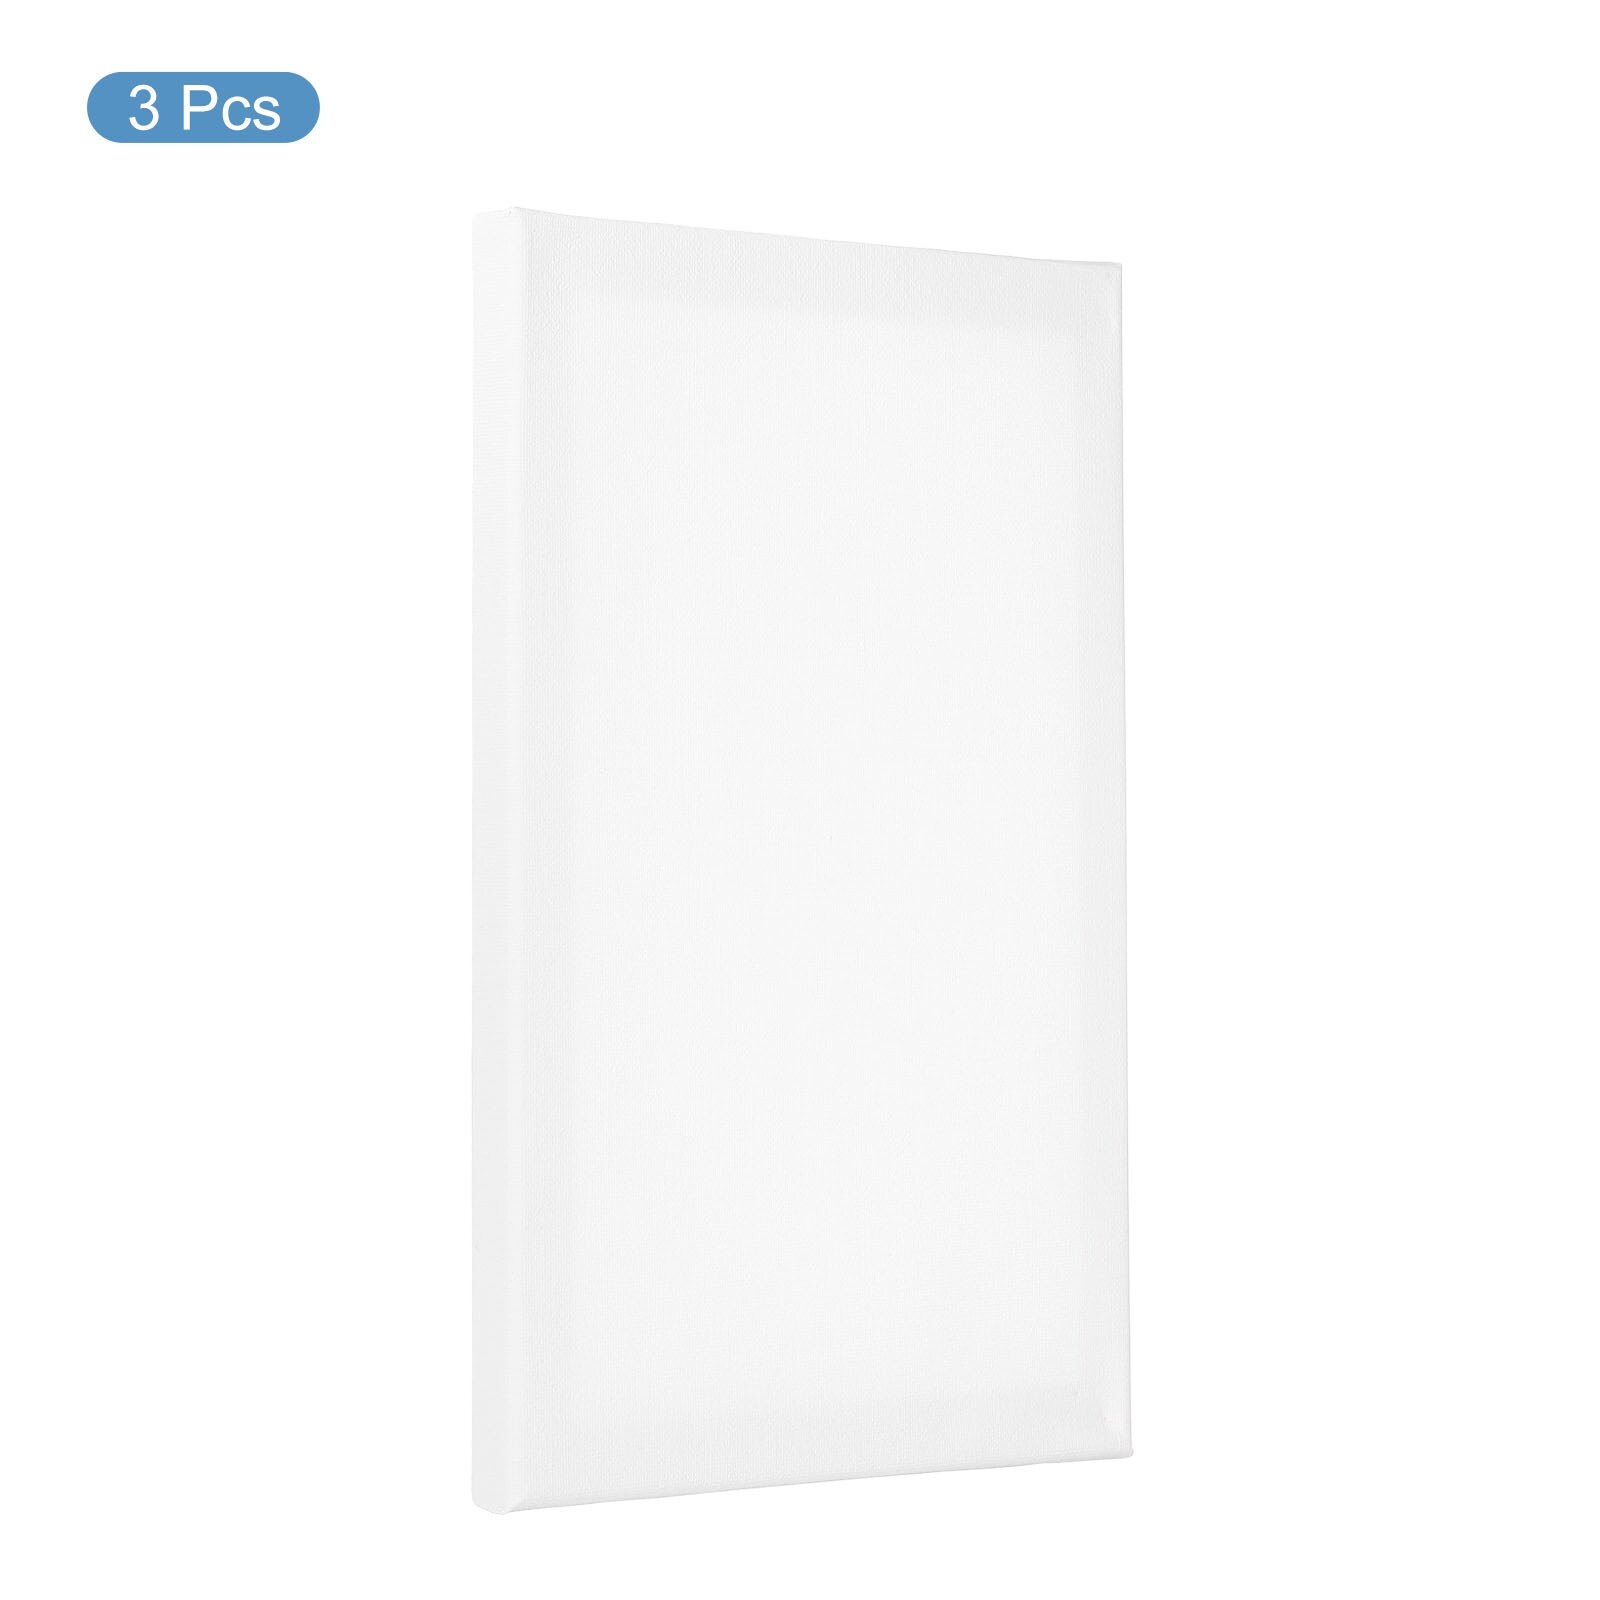  20 Pack Paint Canvases for Painting 5x7 Blank Art